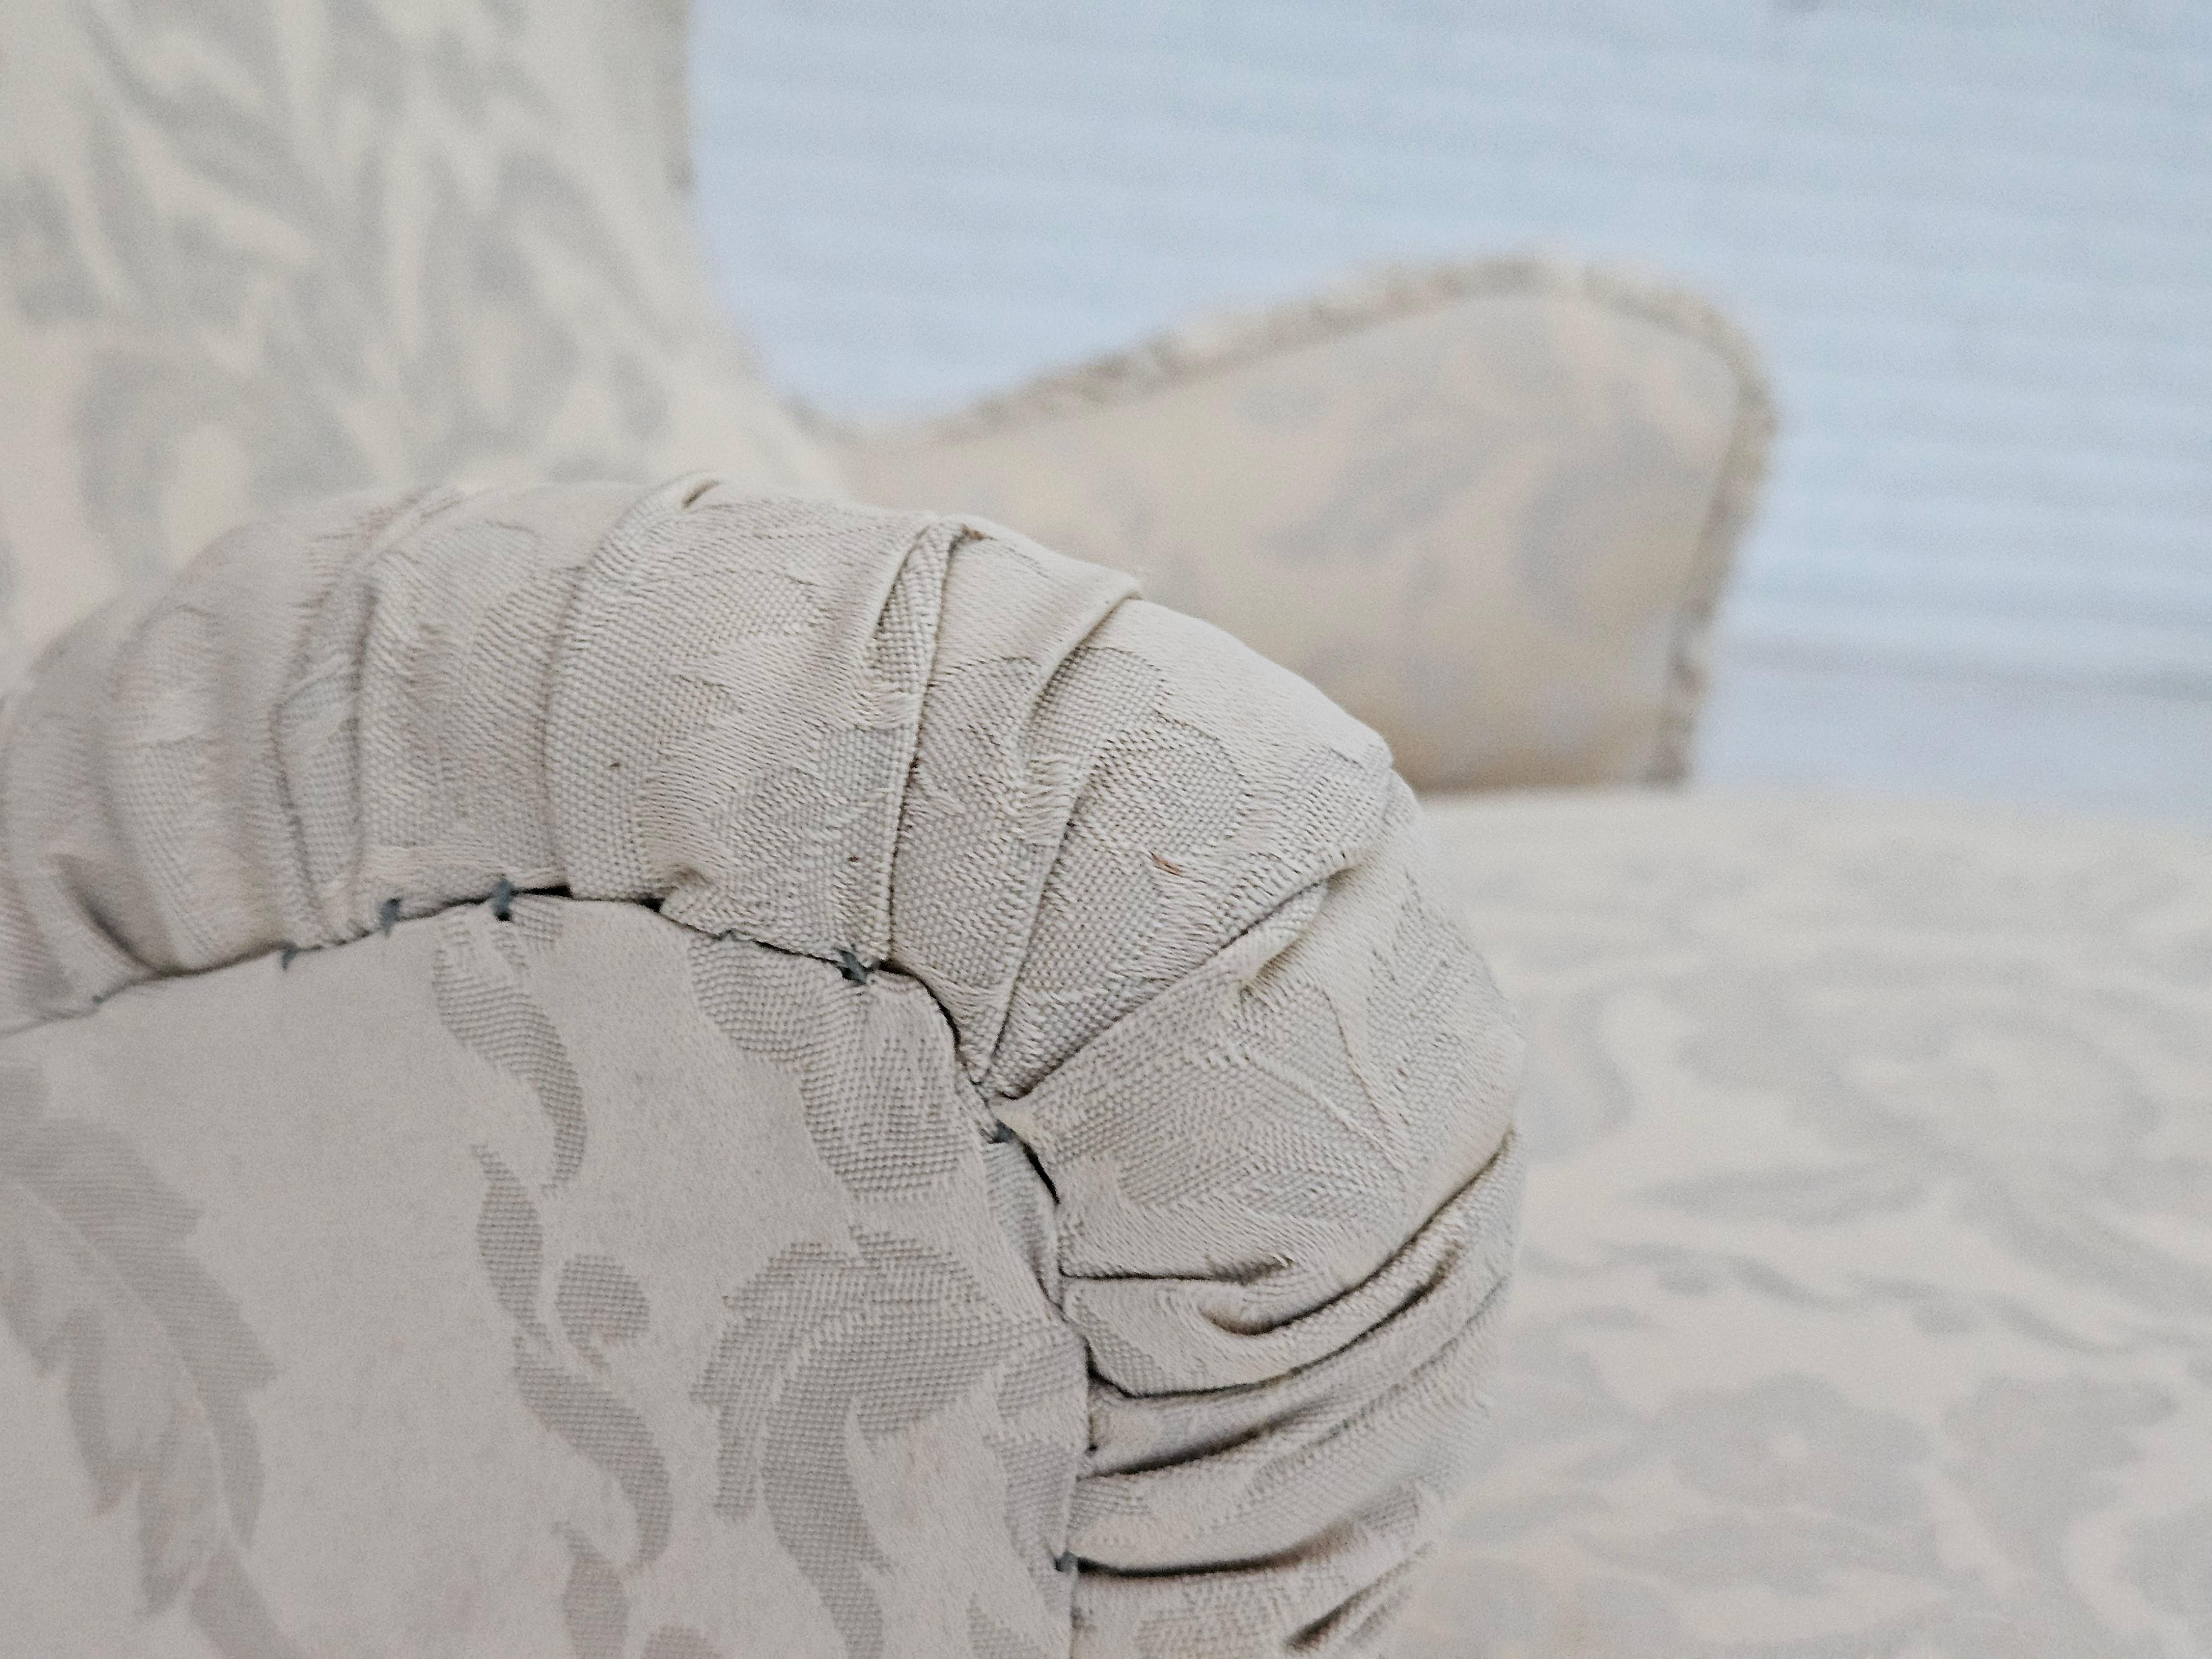 Tissu 1950s, fauteuil Whiting, reupholstered, creamy/white floral fabric. en vente